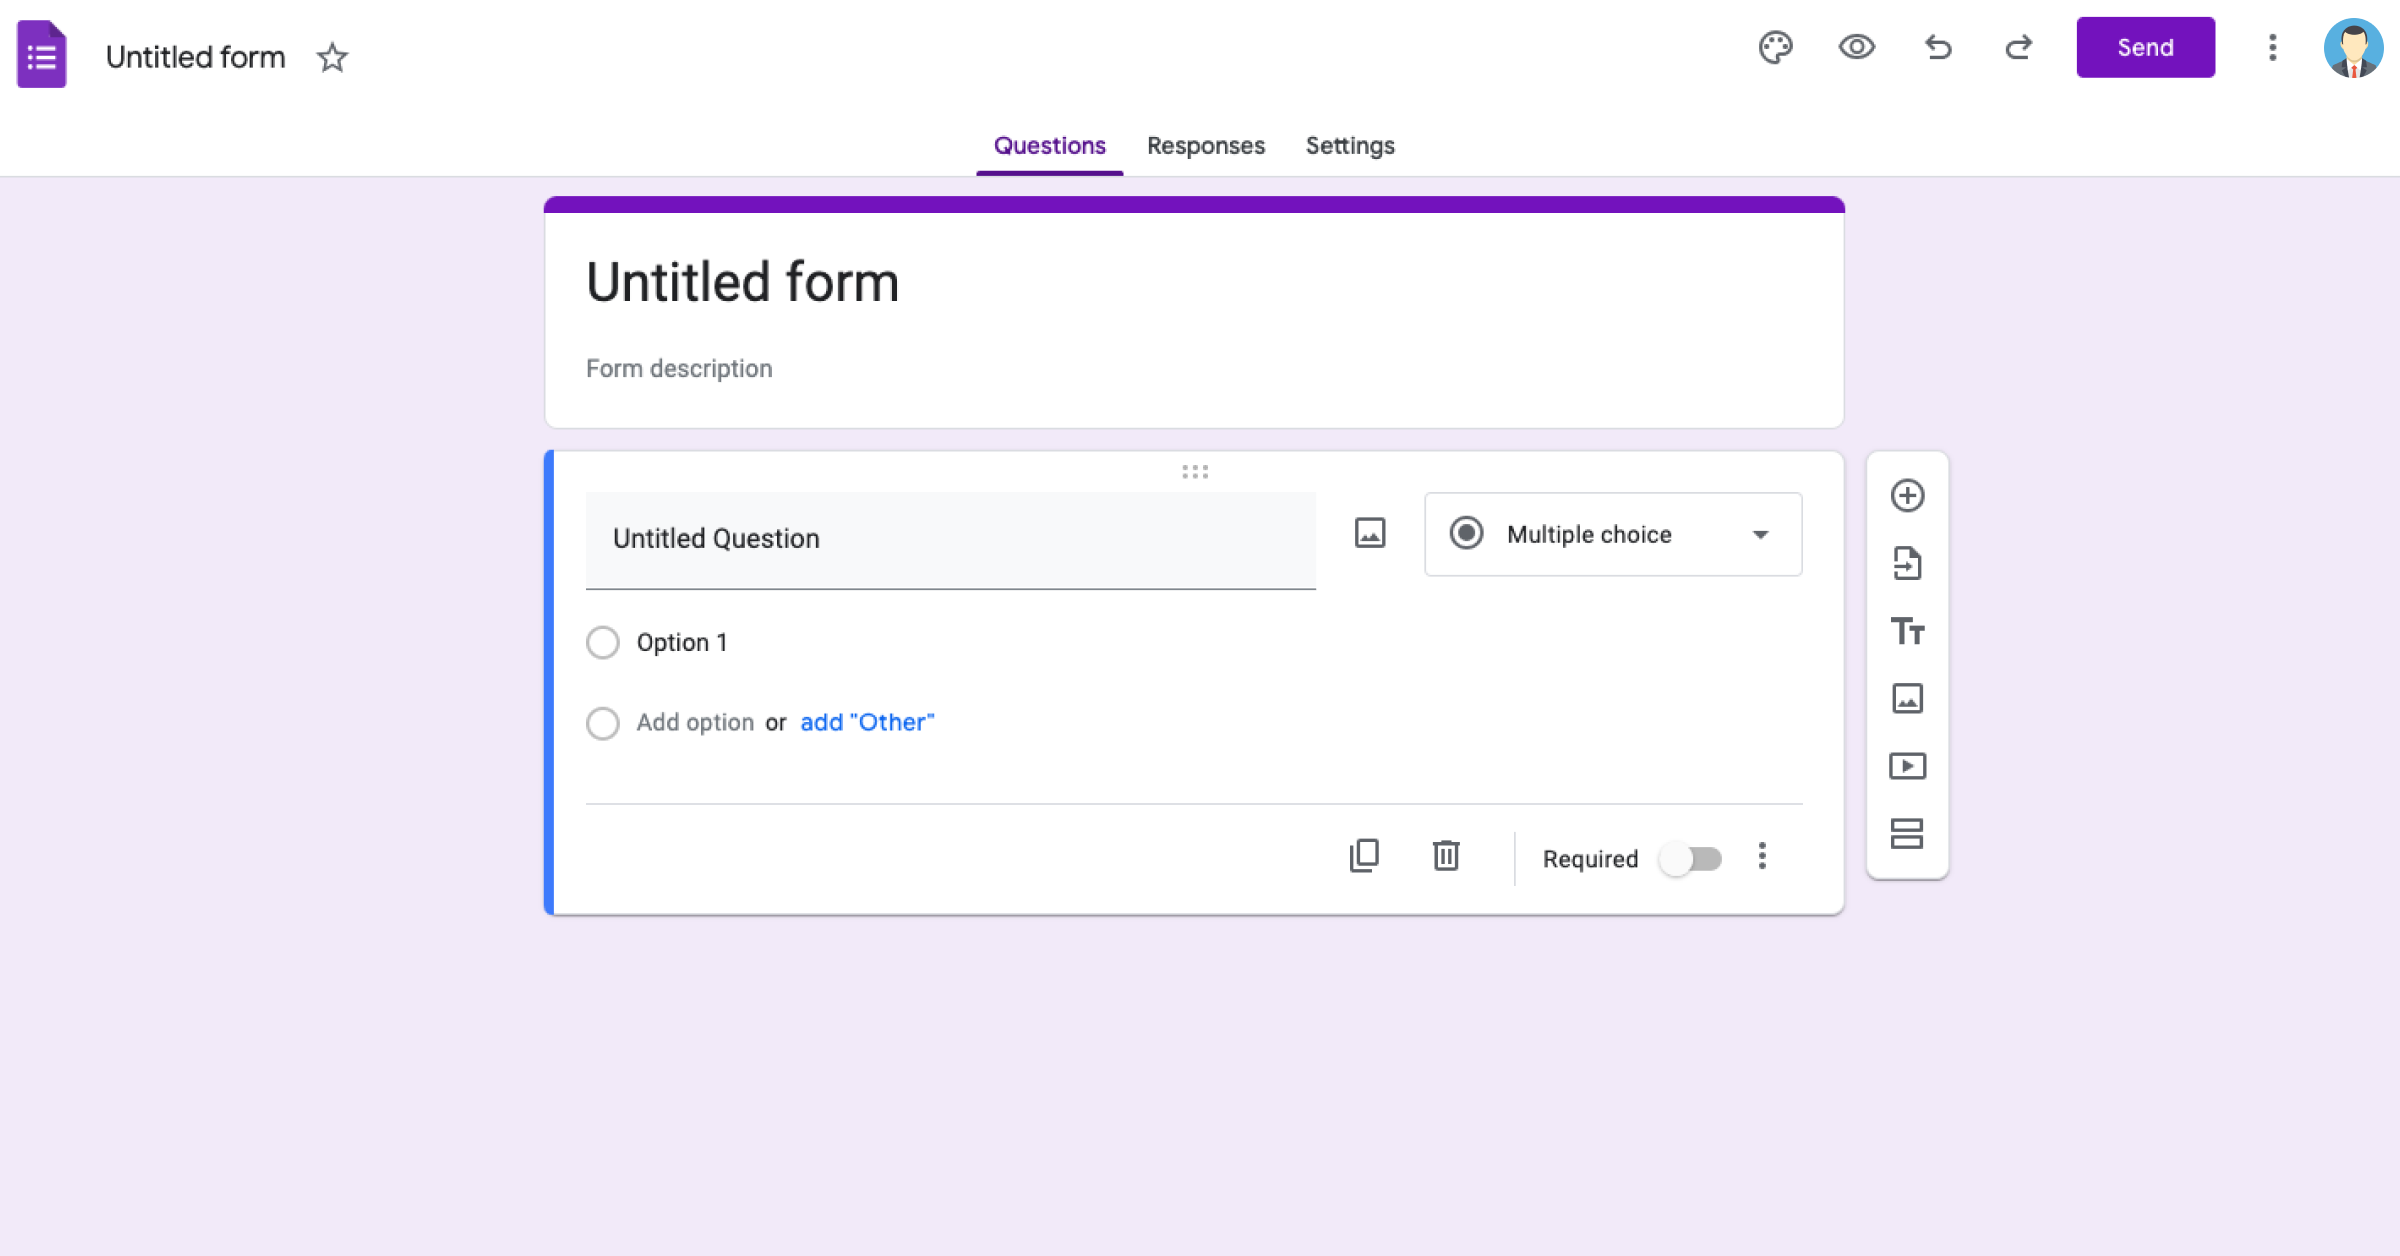 How to collect anonymous employee feedback with Google Forms?